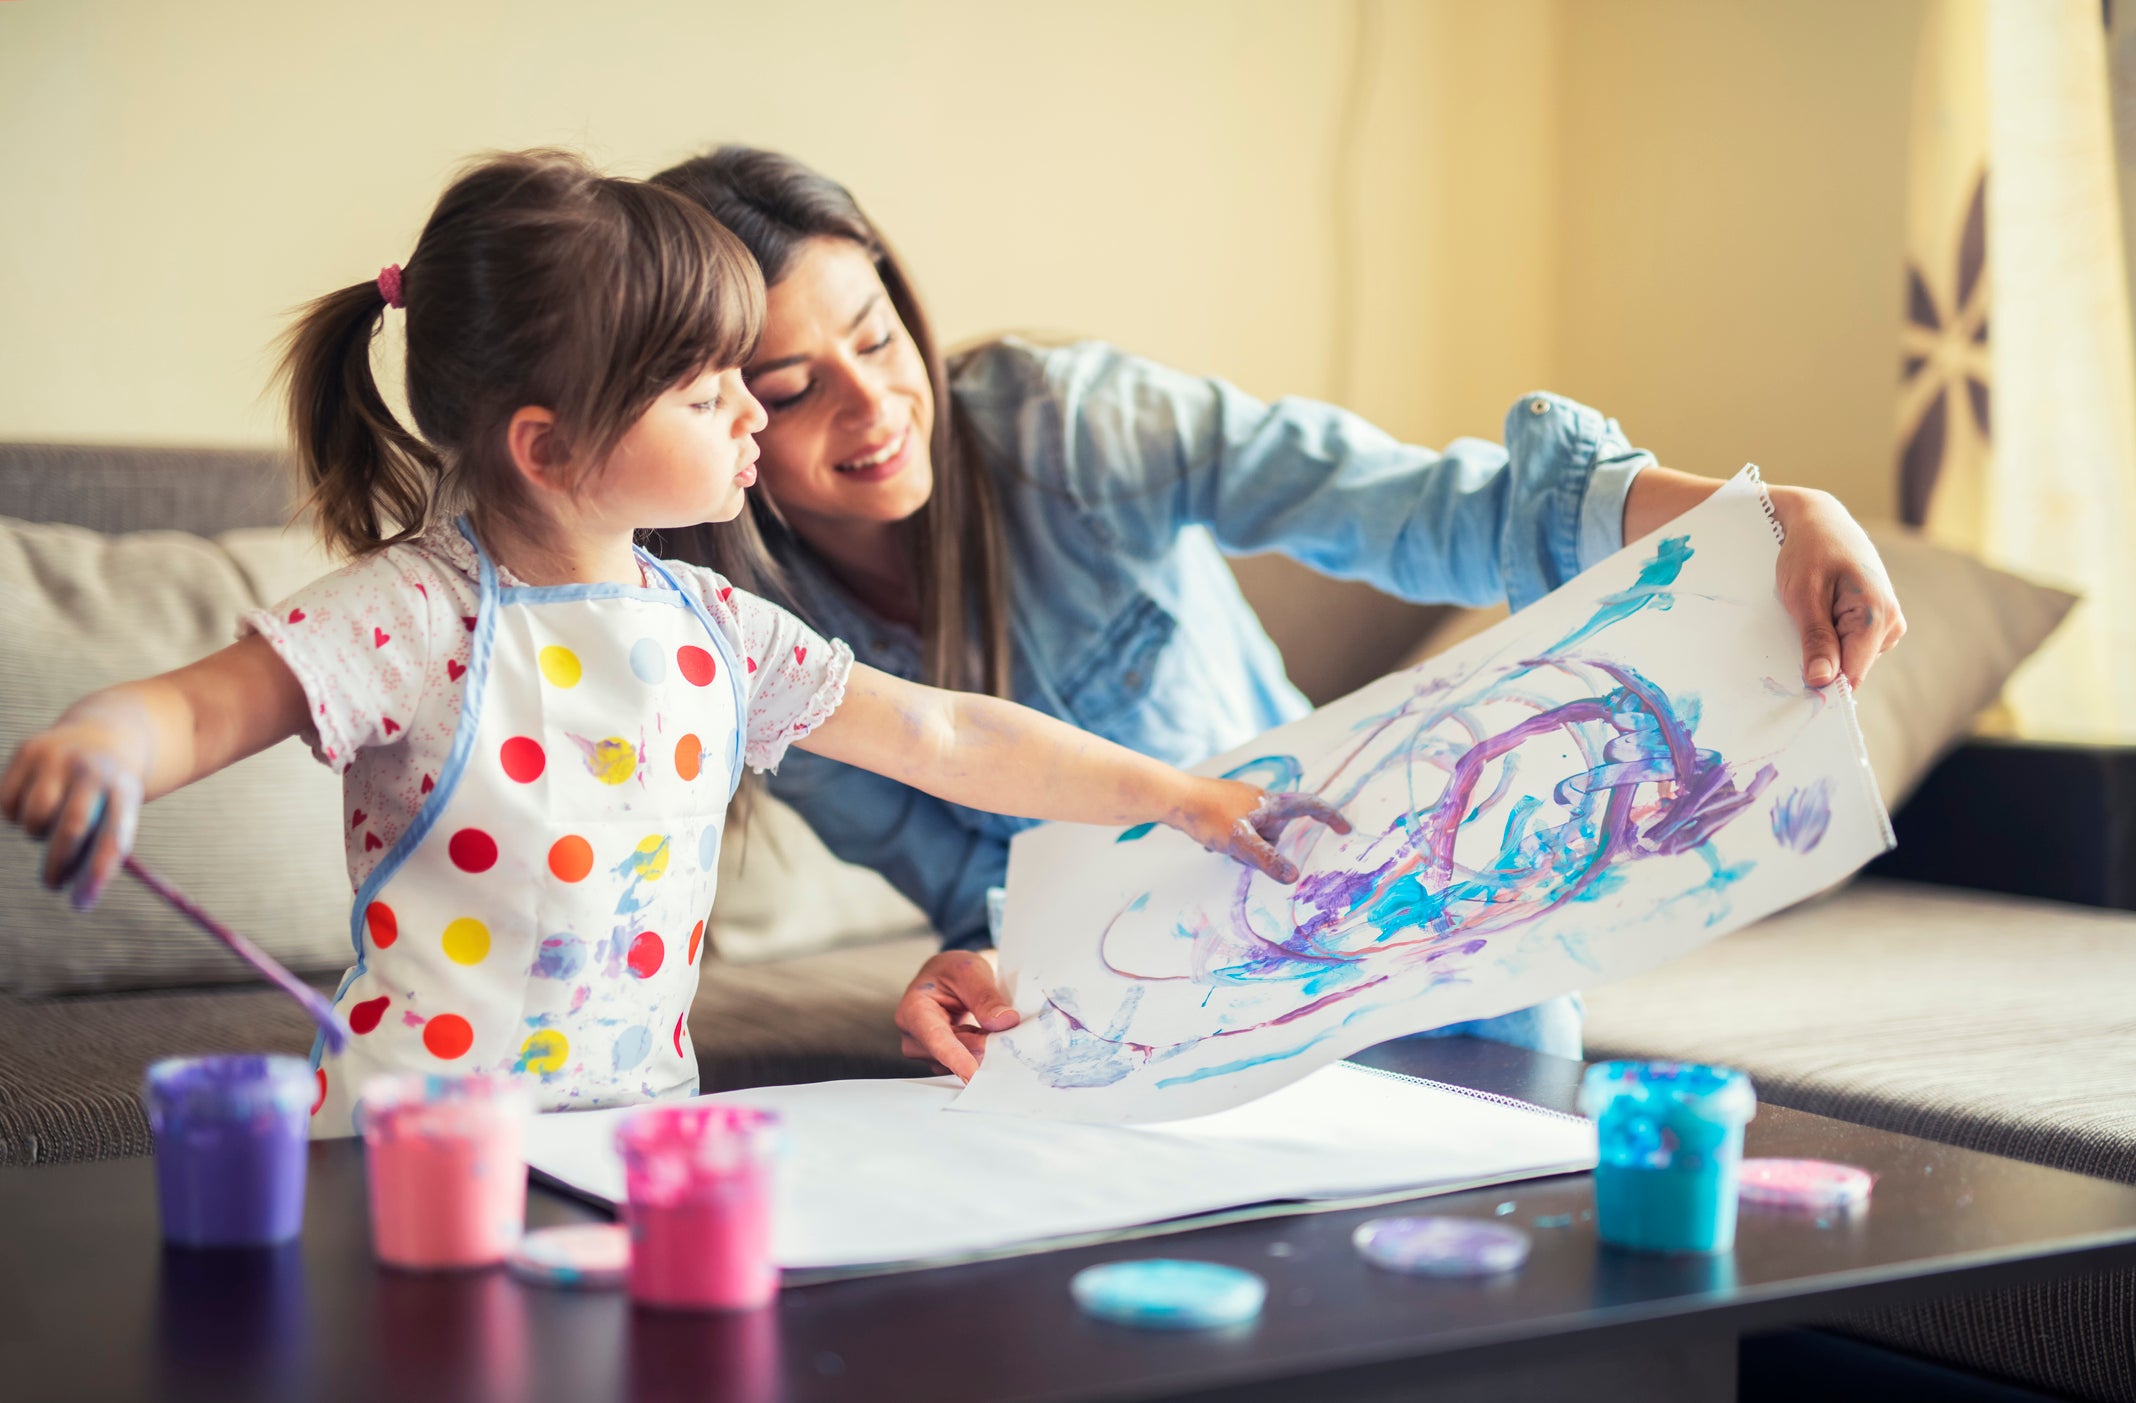 Finger Painting Ideas, Our hands and fingers are used every single day for  so many different tasks. But how about painting? Letting little ones use  their hands and fingers to